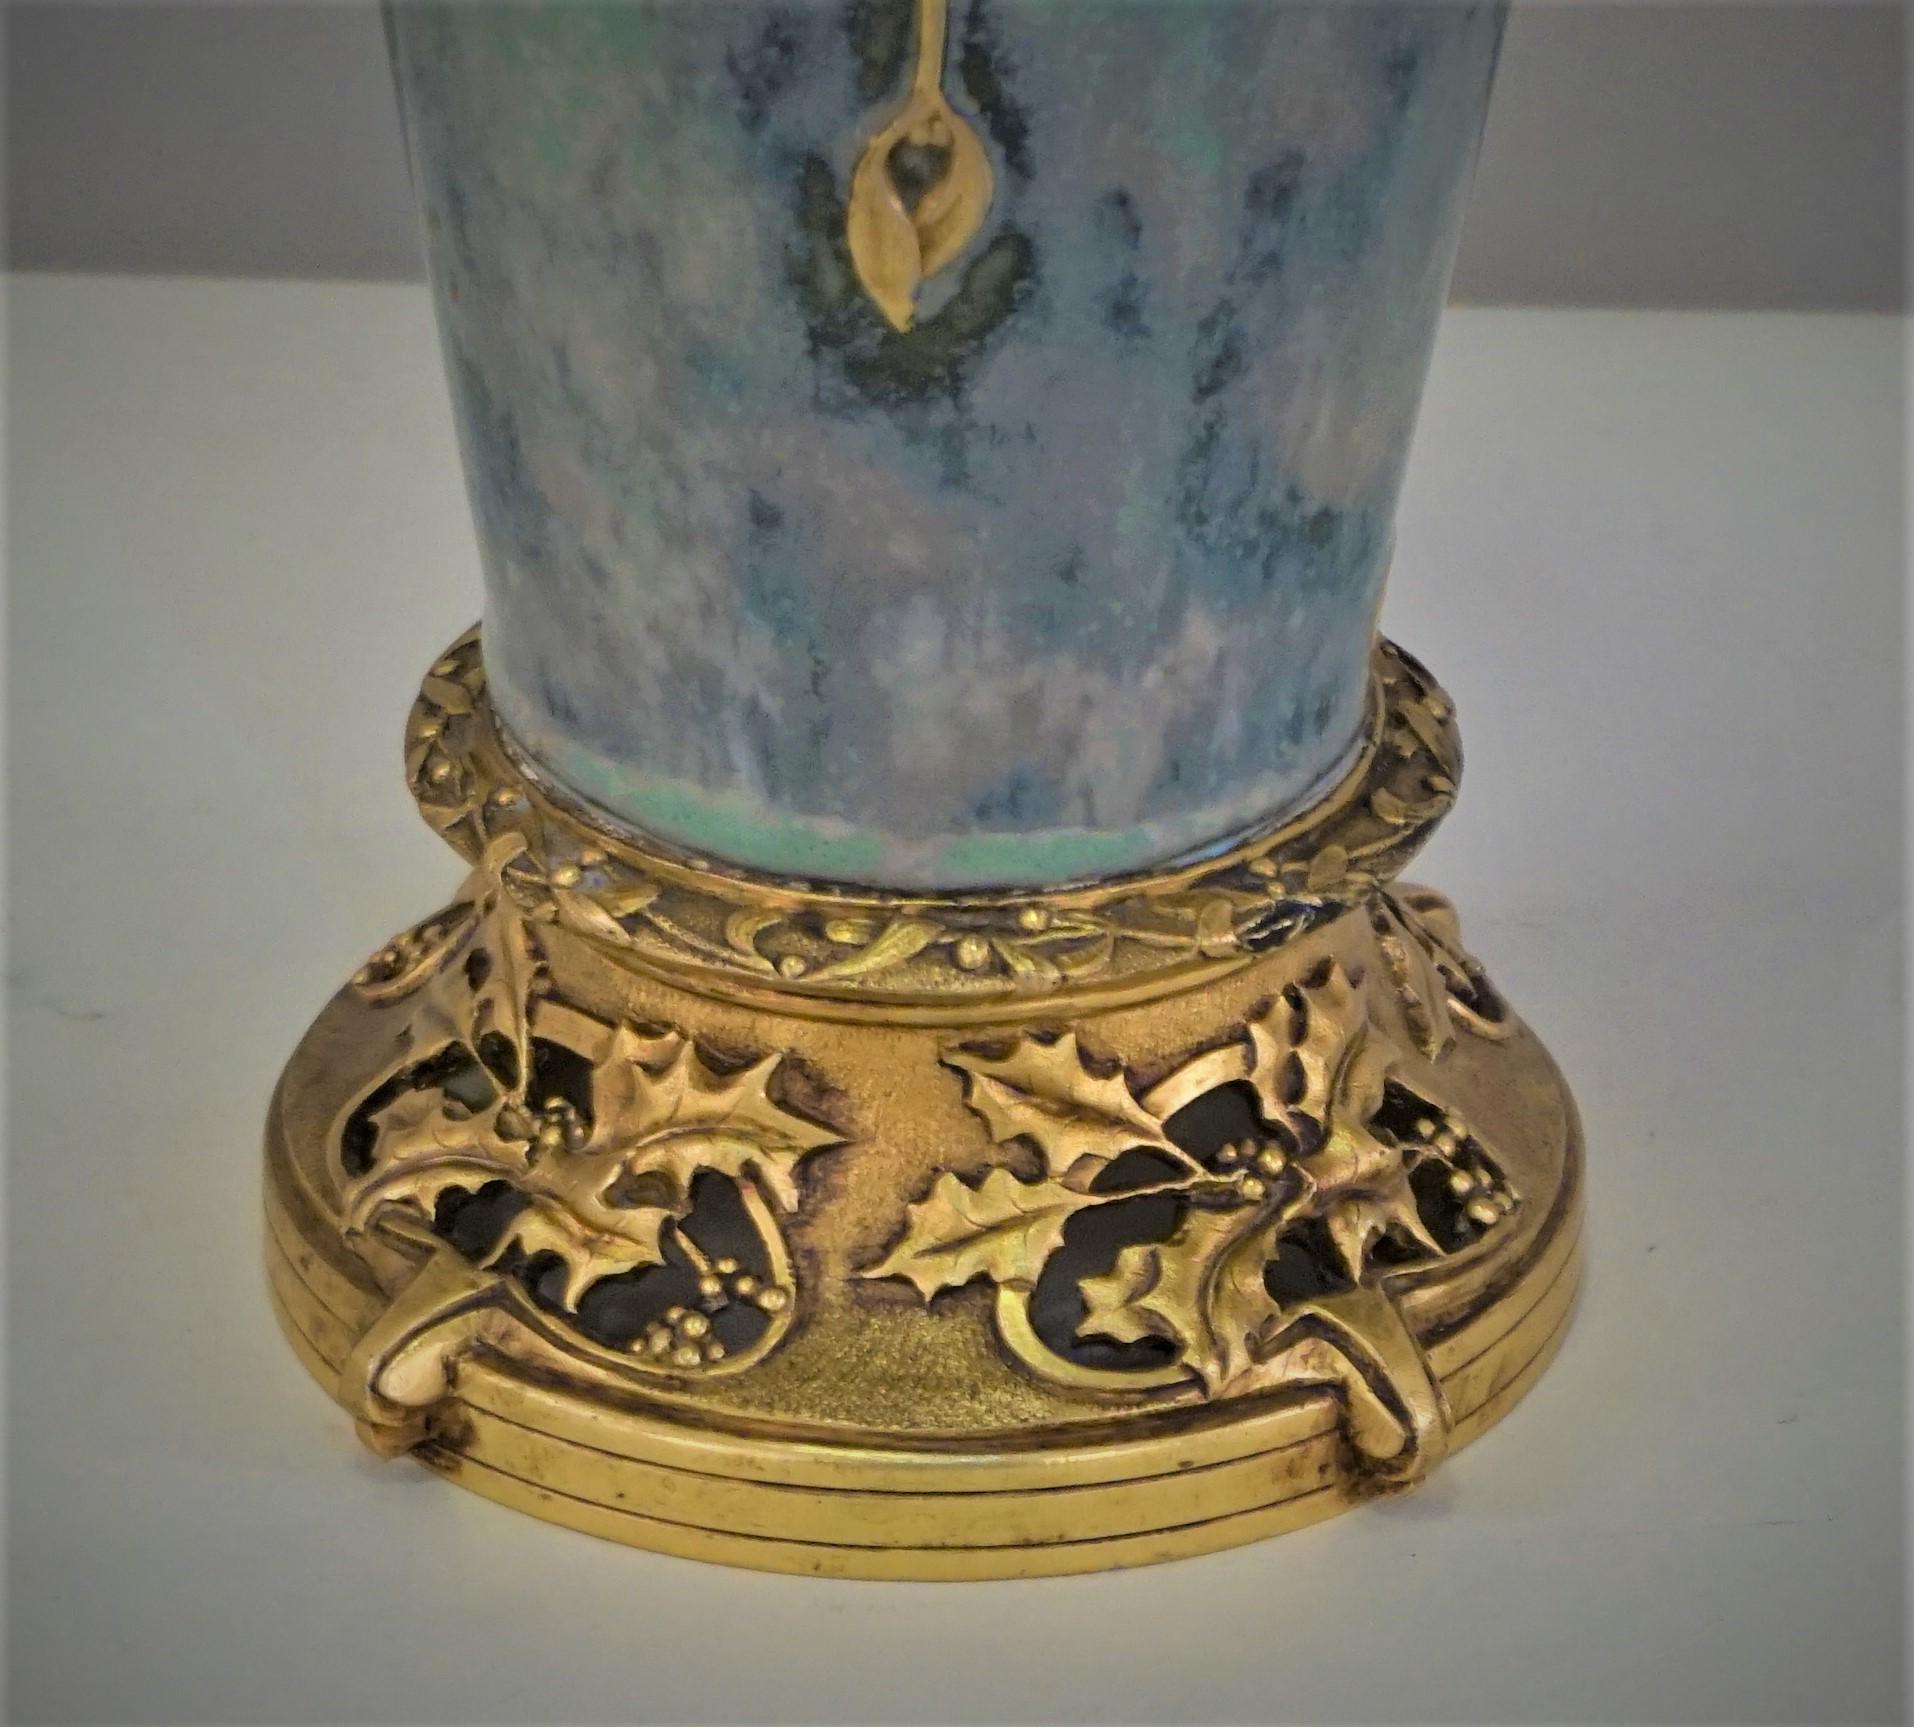 Paul Louchet Vase with gilt-bronze base, France, c. 1900, in the Art Nouveau style gold raise faces on multi color gloss background set on an openwork floral base, raised bronze base.